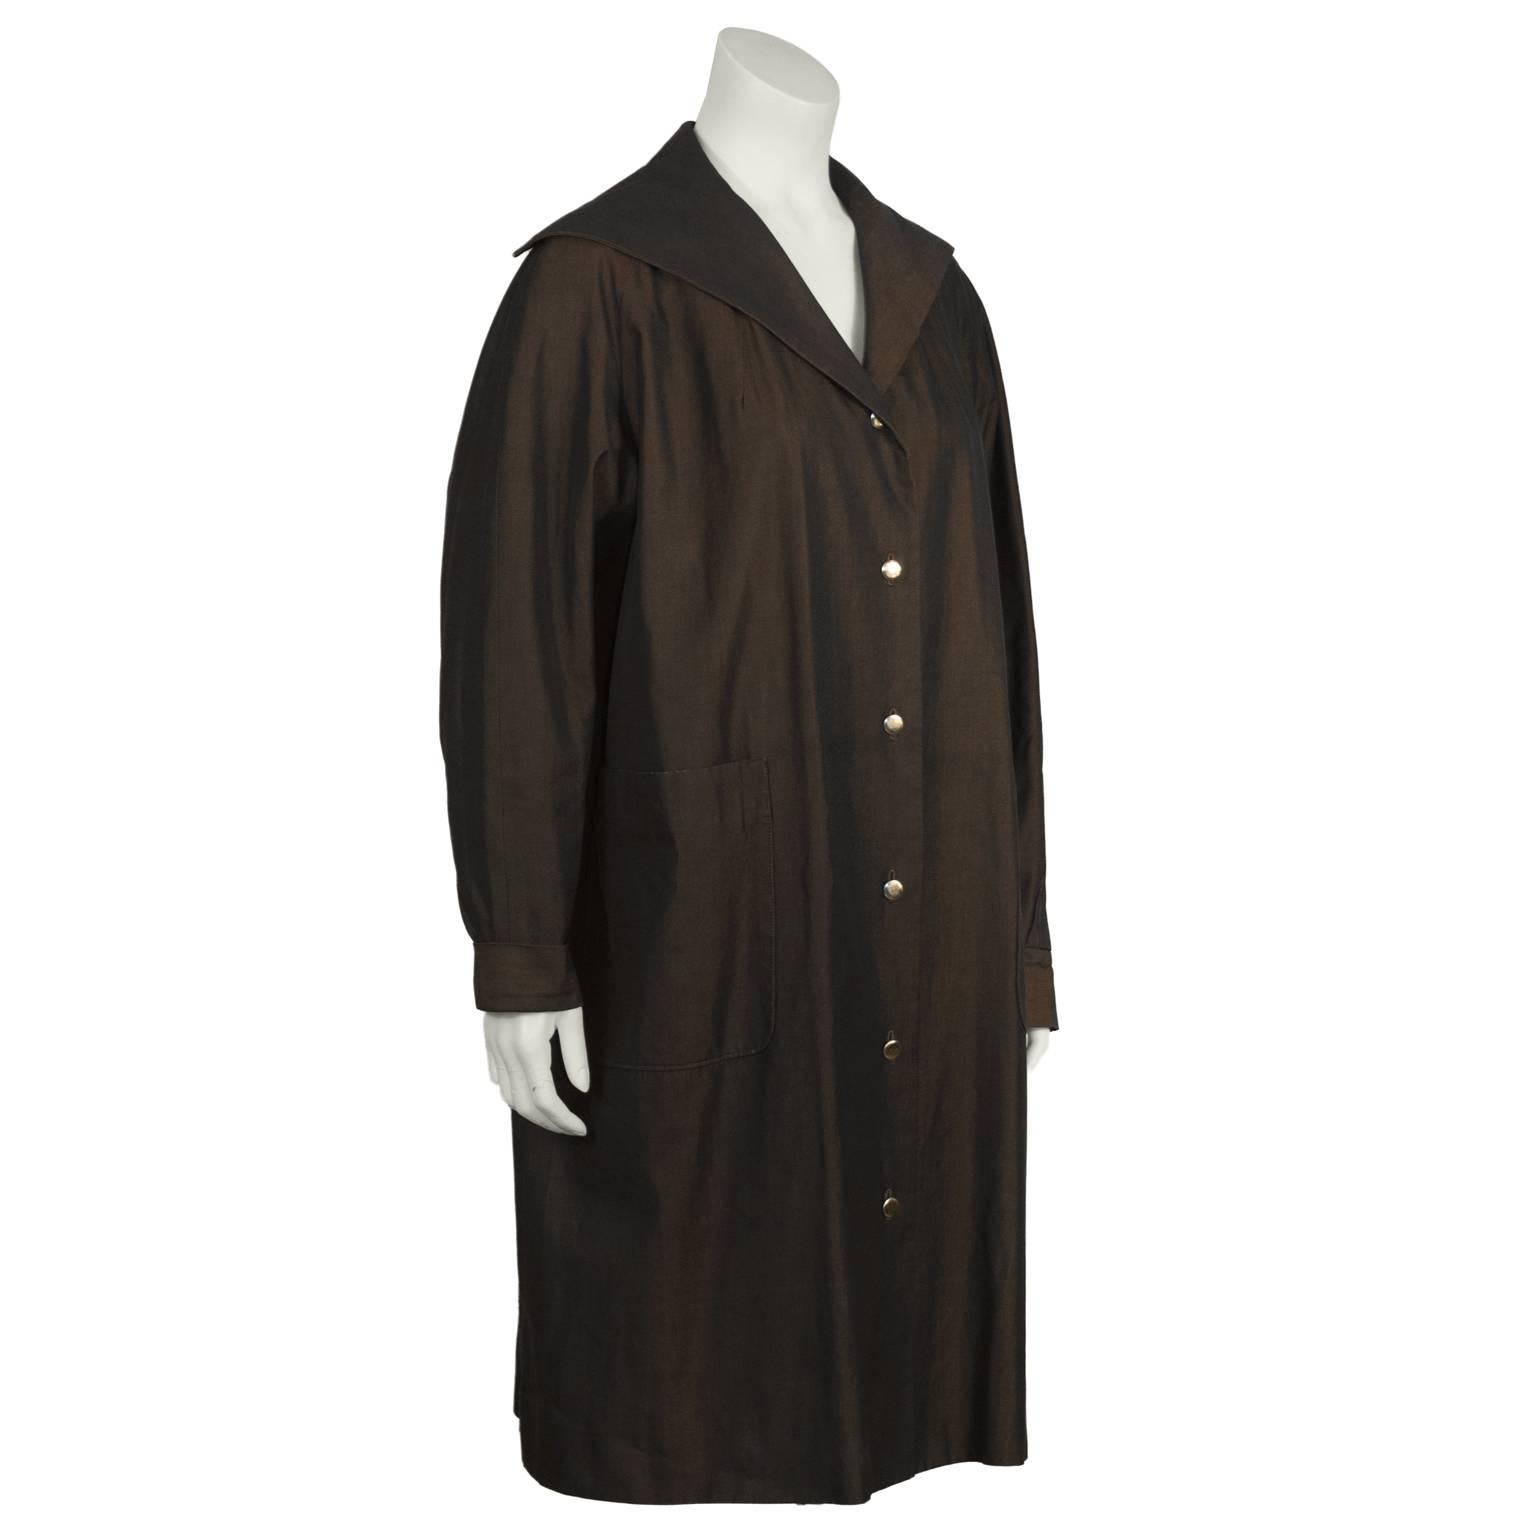 1950’s brown Schiaparelli overcoat from her licensed label with front patch pockets and a sailor style collar. The slightly iridescent fabric gives off the perfect amount of sheen to make this coat suitable for day or evening wear and the gold